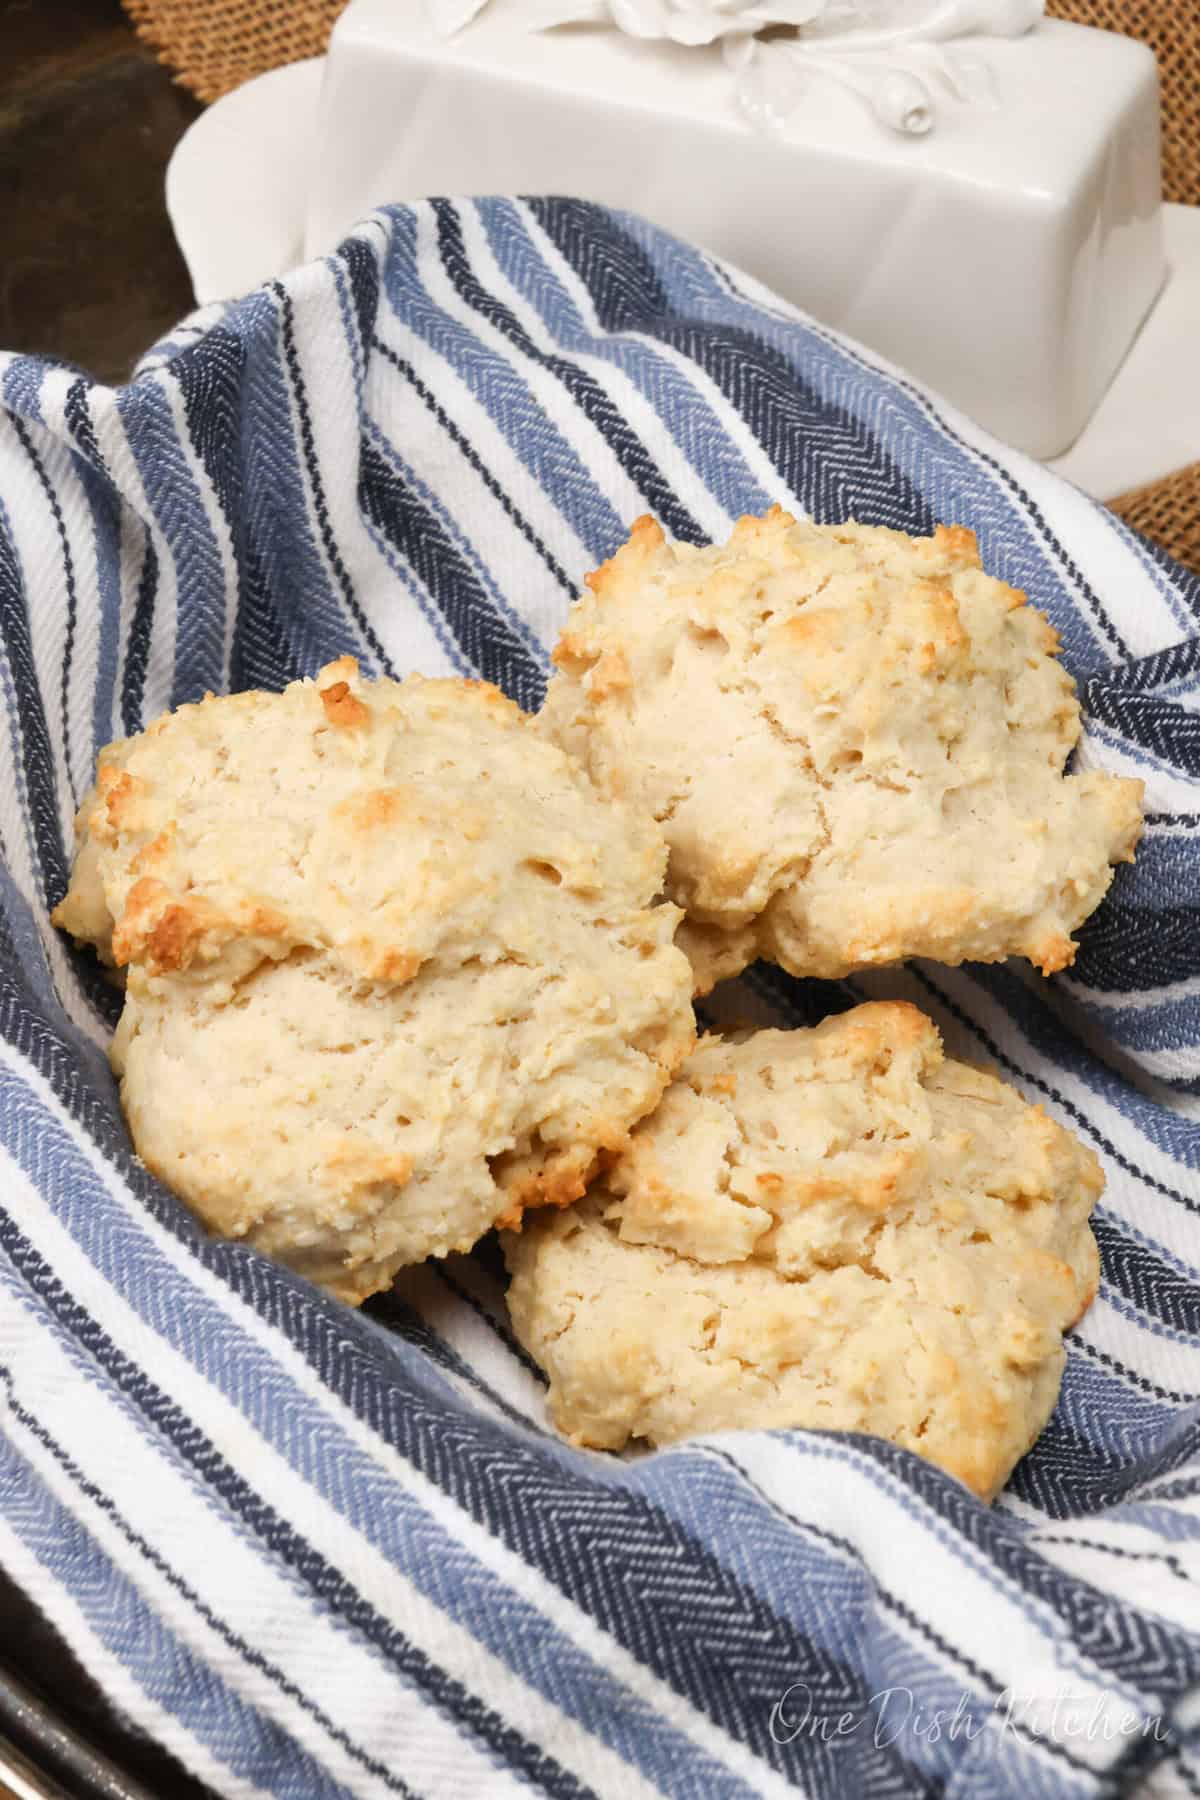 three drop biscuits in a bread basket.